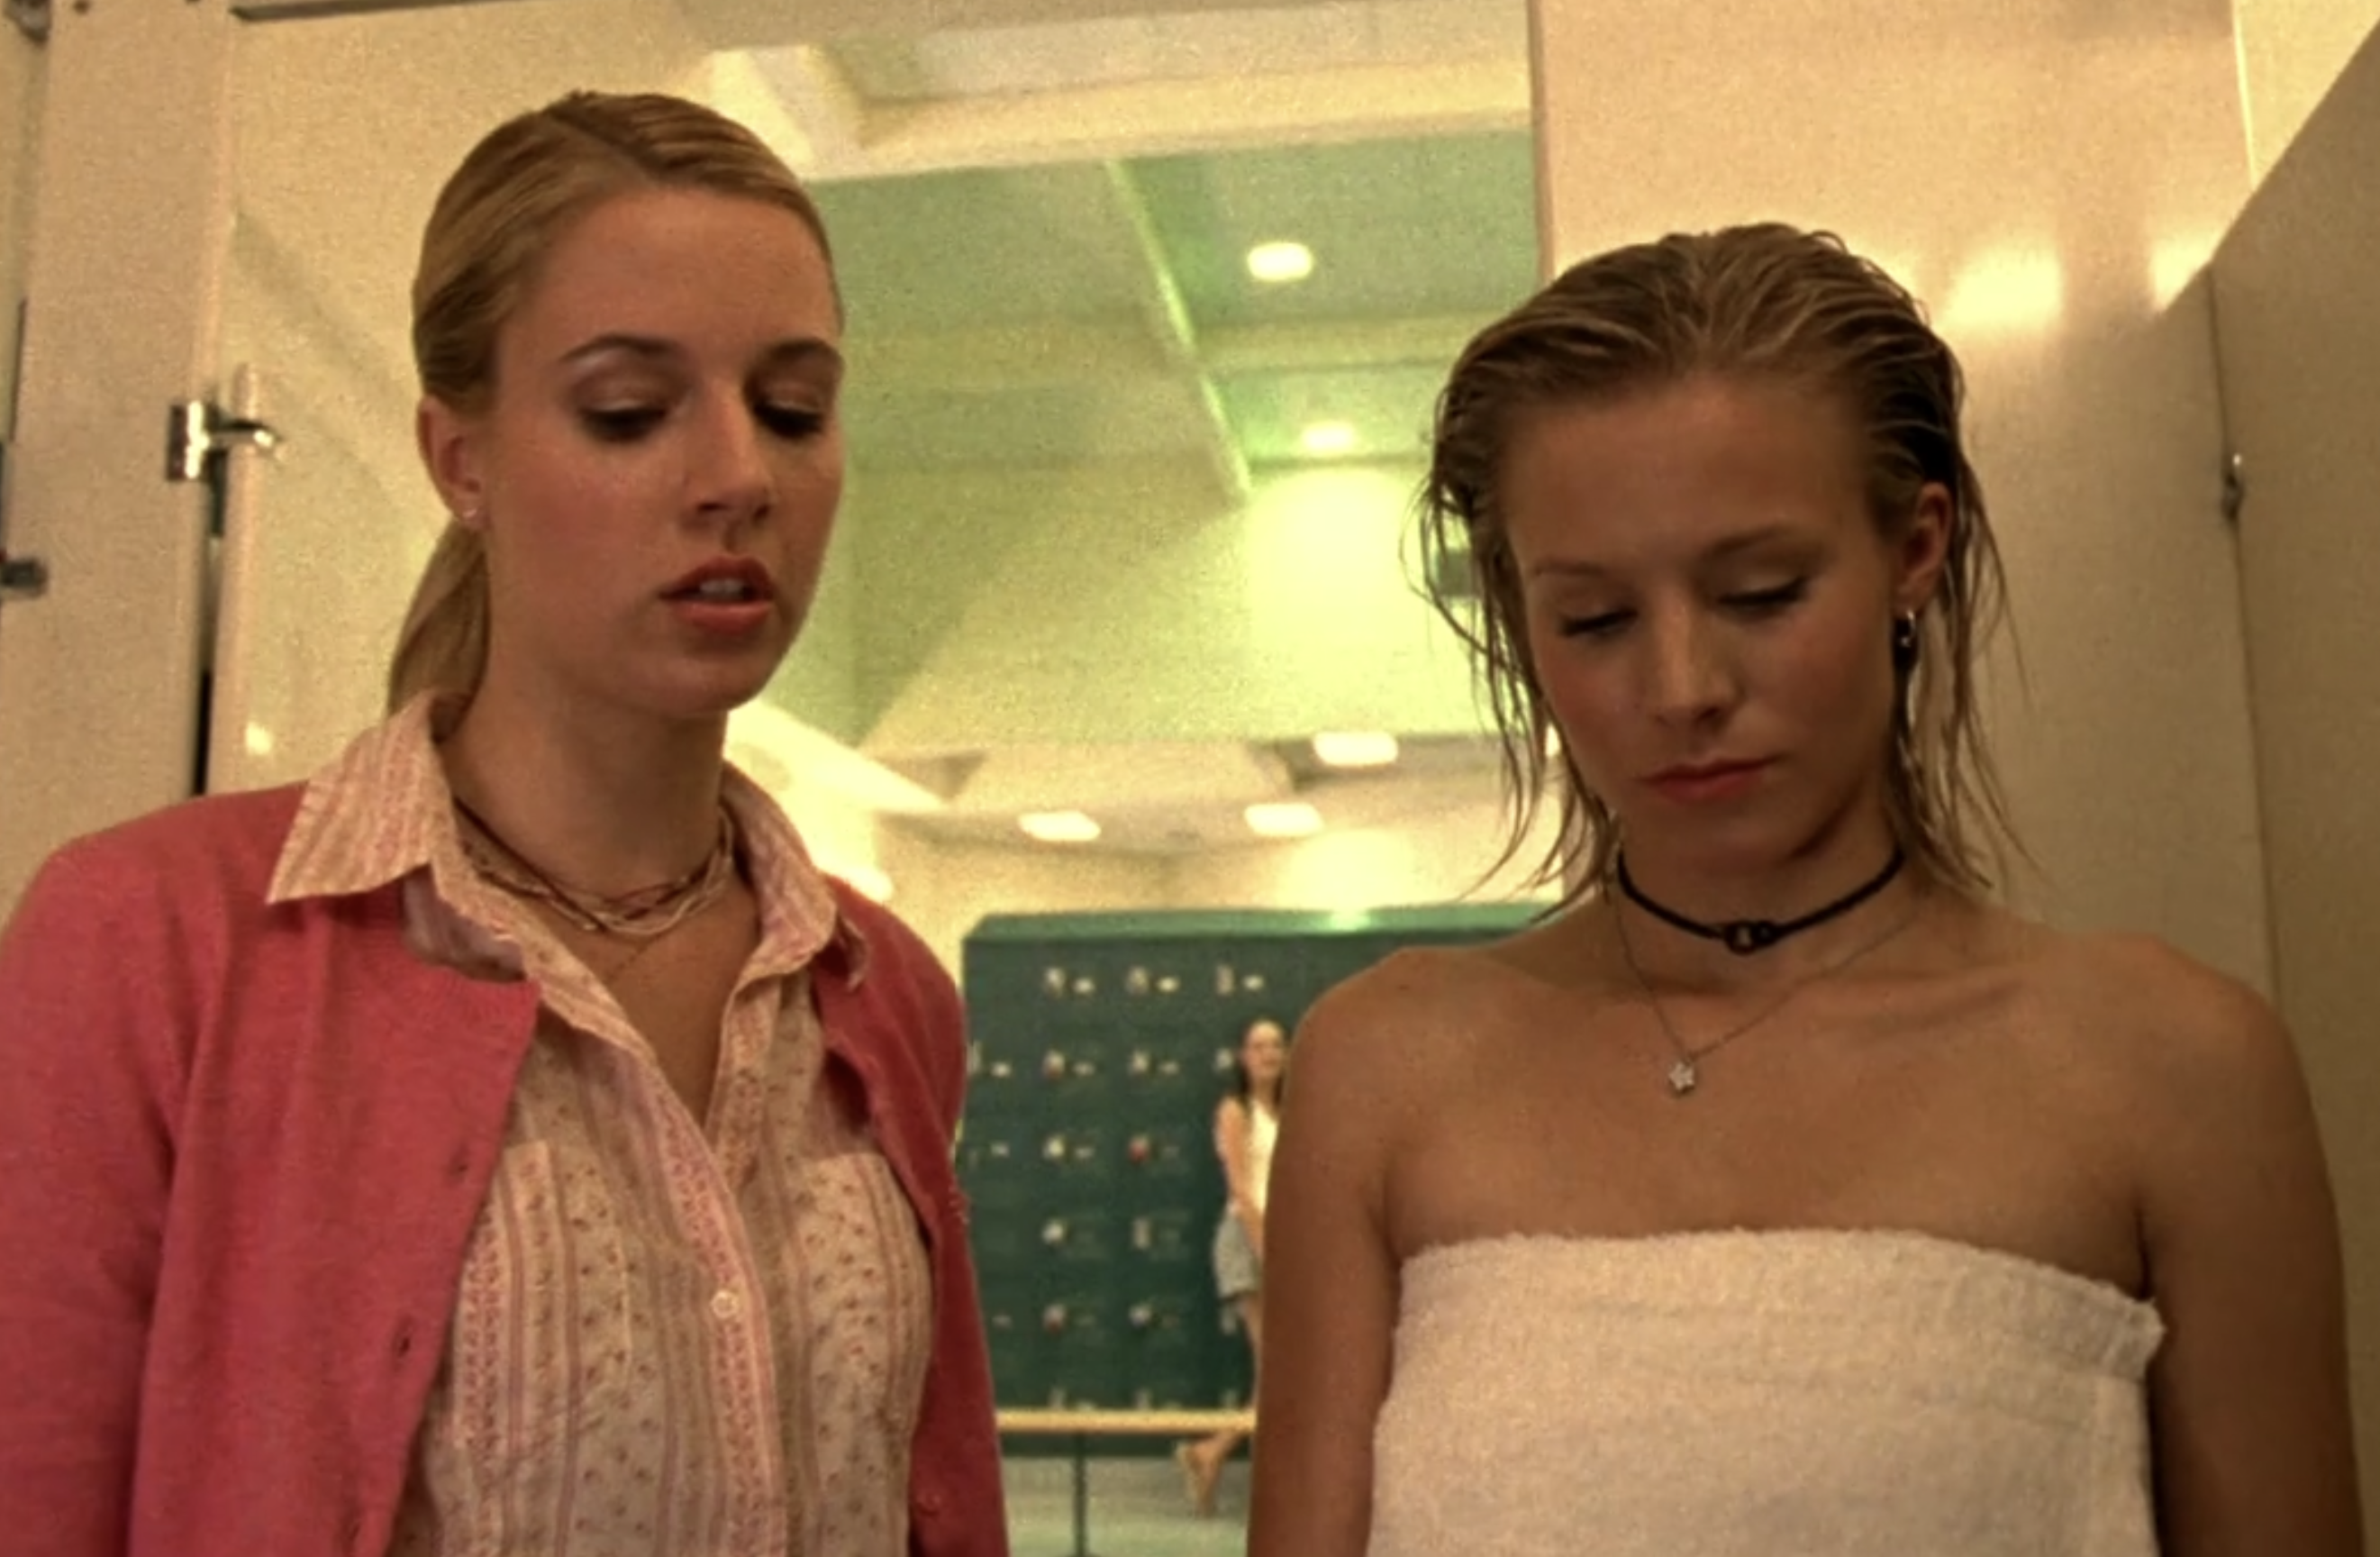 A screenshot from Veronica Mars S1E8, Meg and Veronica are standing in the locking room looking down at the (off-screen) toilet where Veronica's clothes have been stuffed. Veronica is wearing a towel.